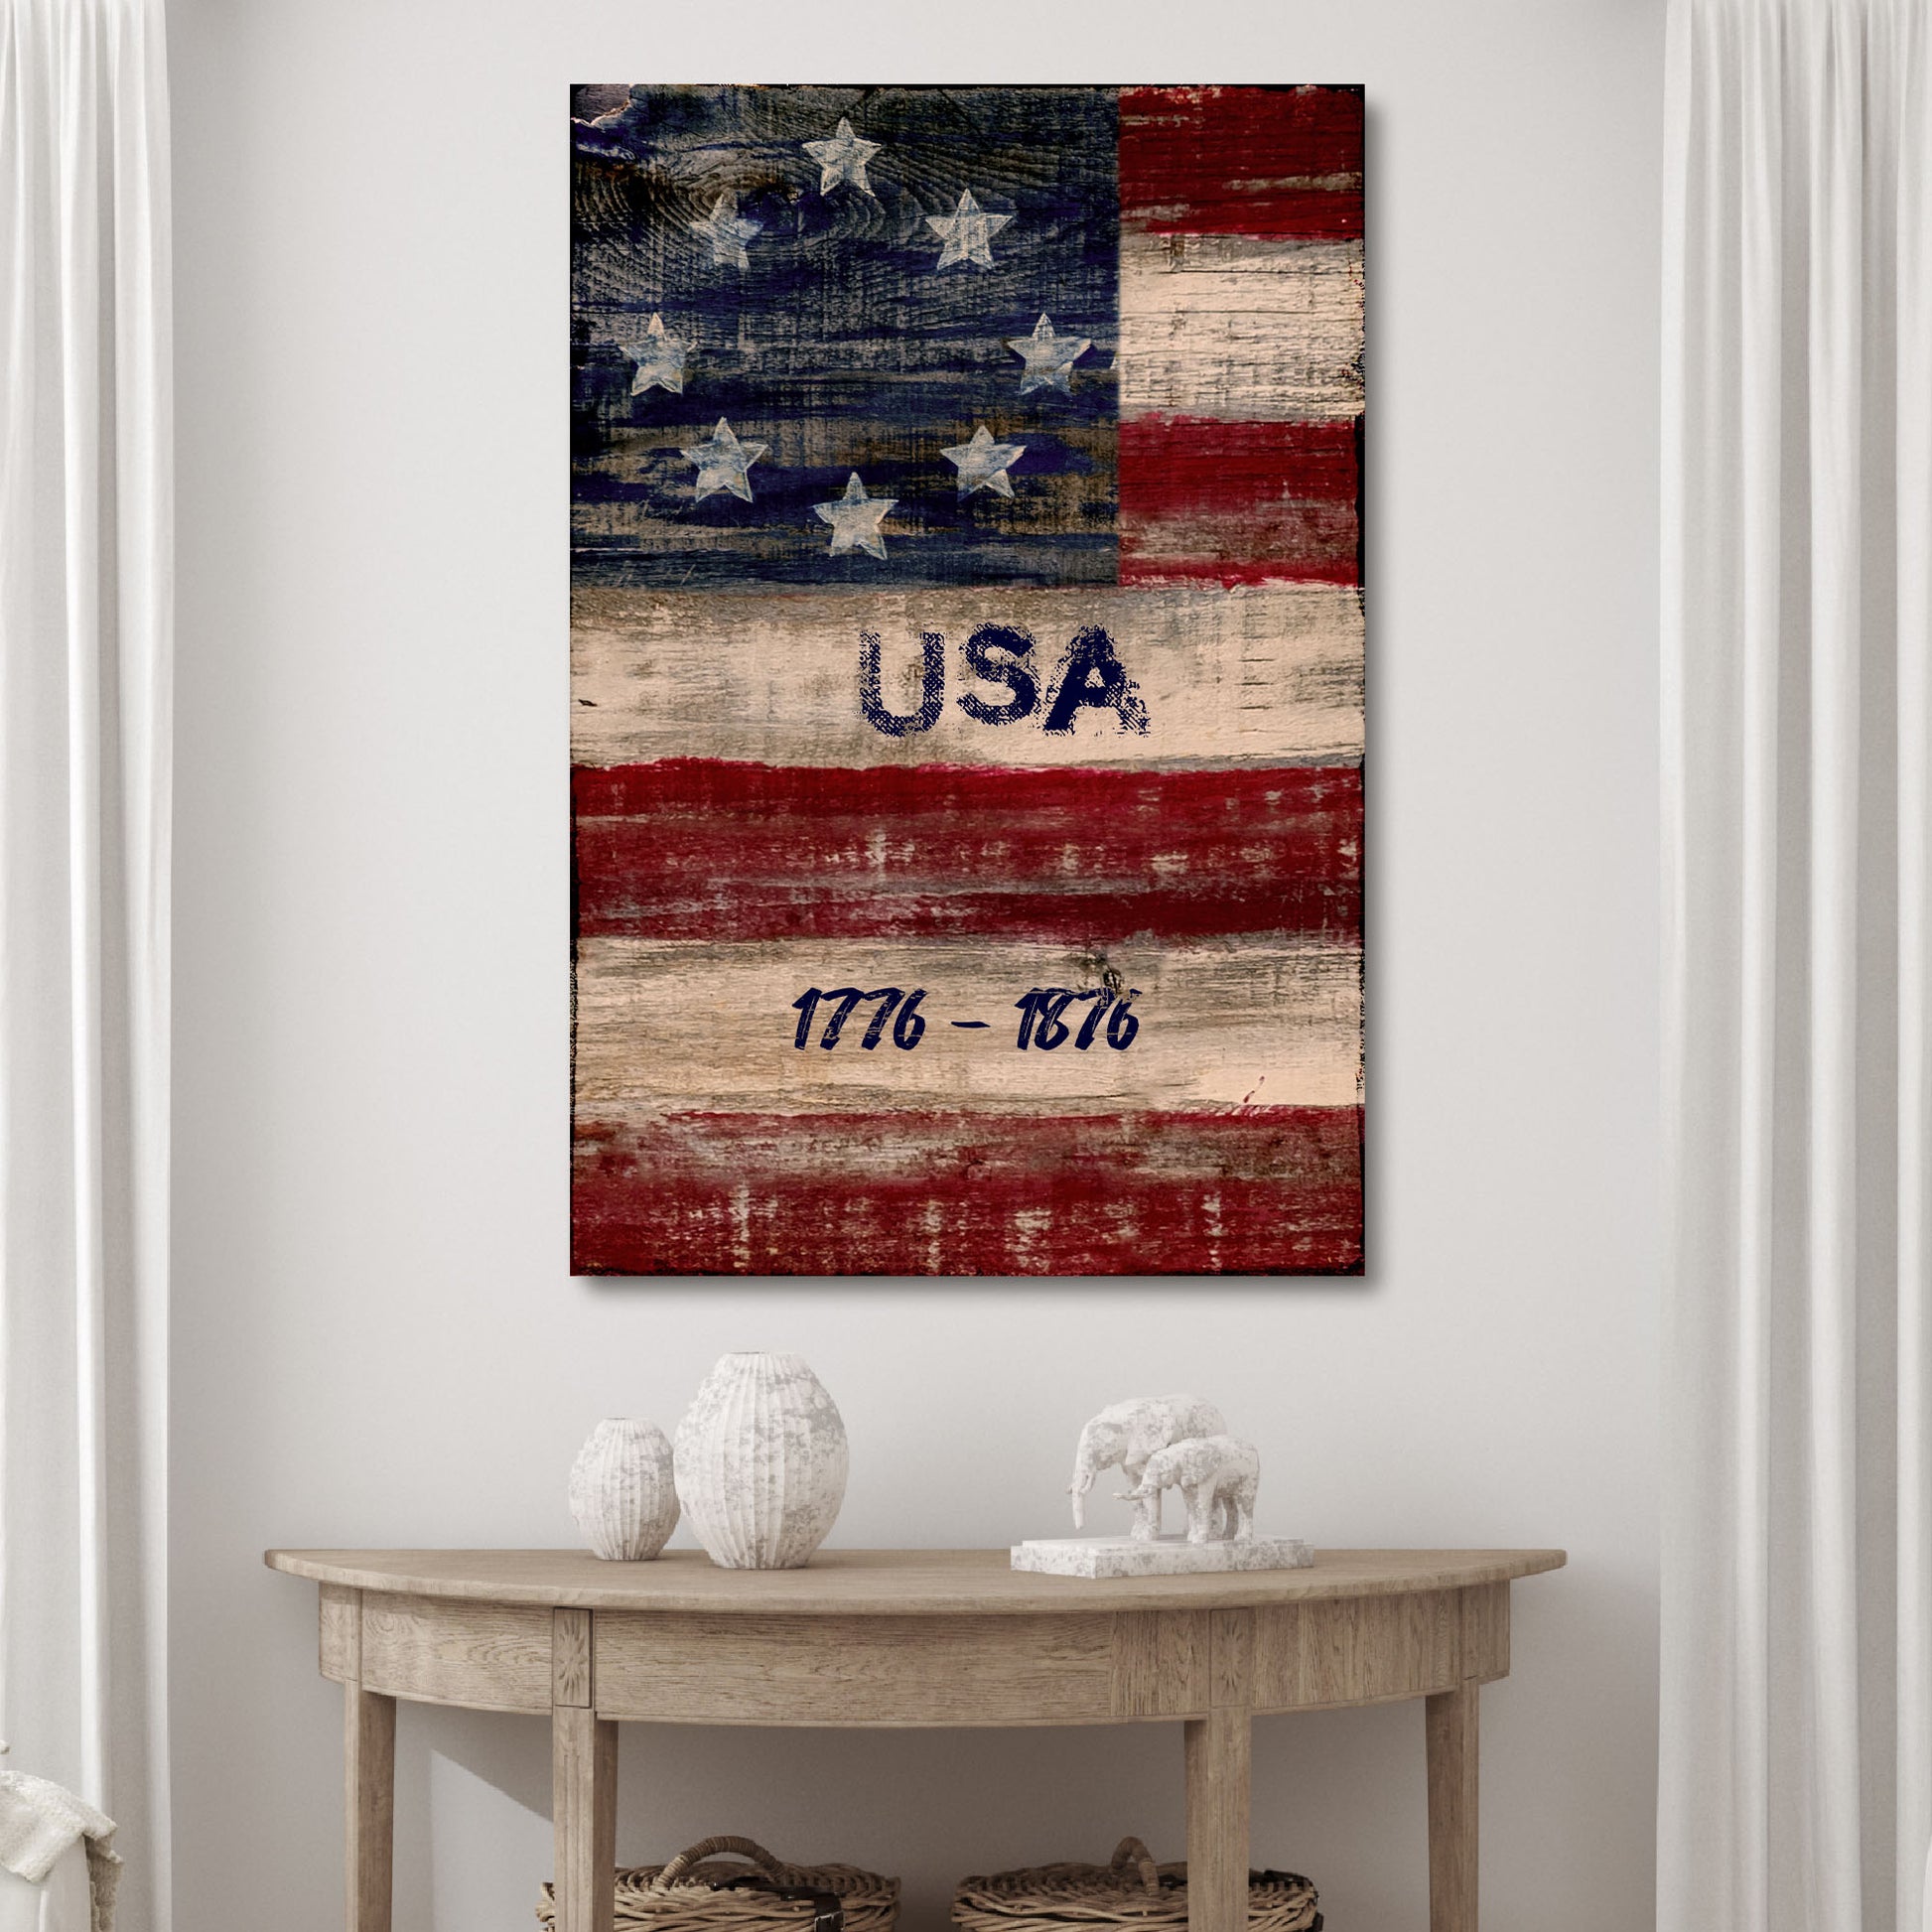 USA 1776-1876 Sign Style 2 - Image by Tailored Canvases